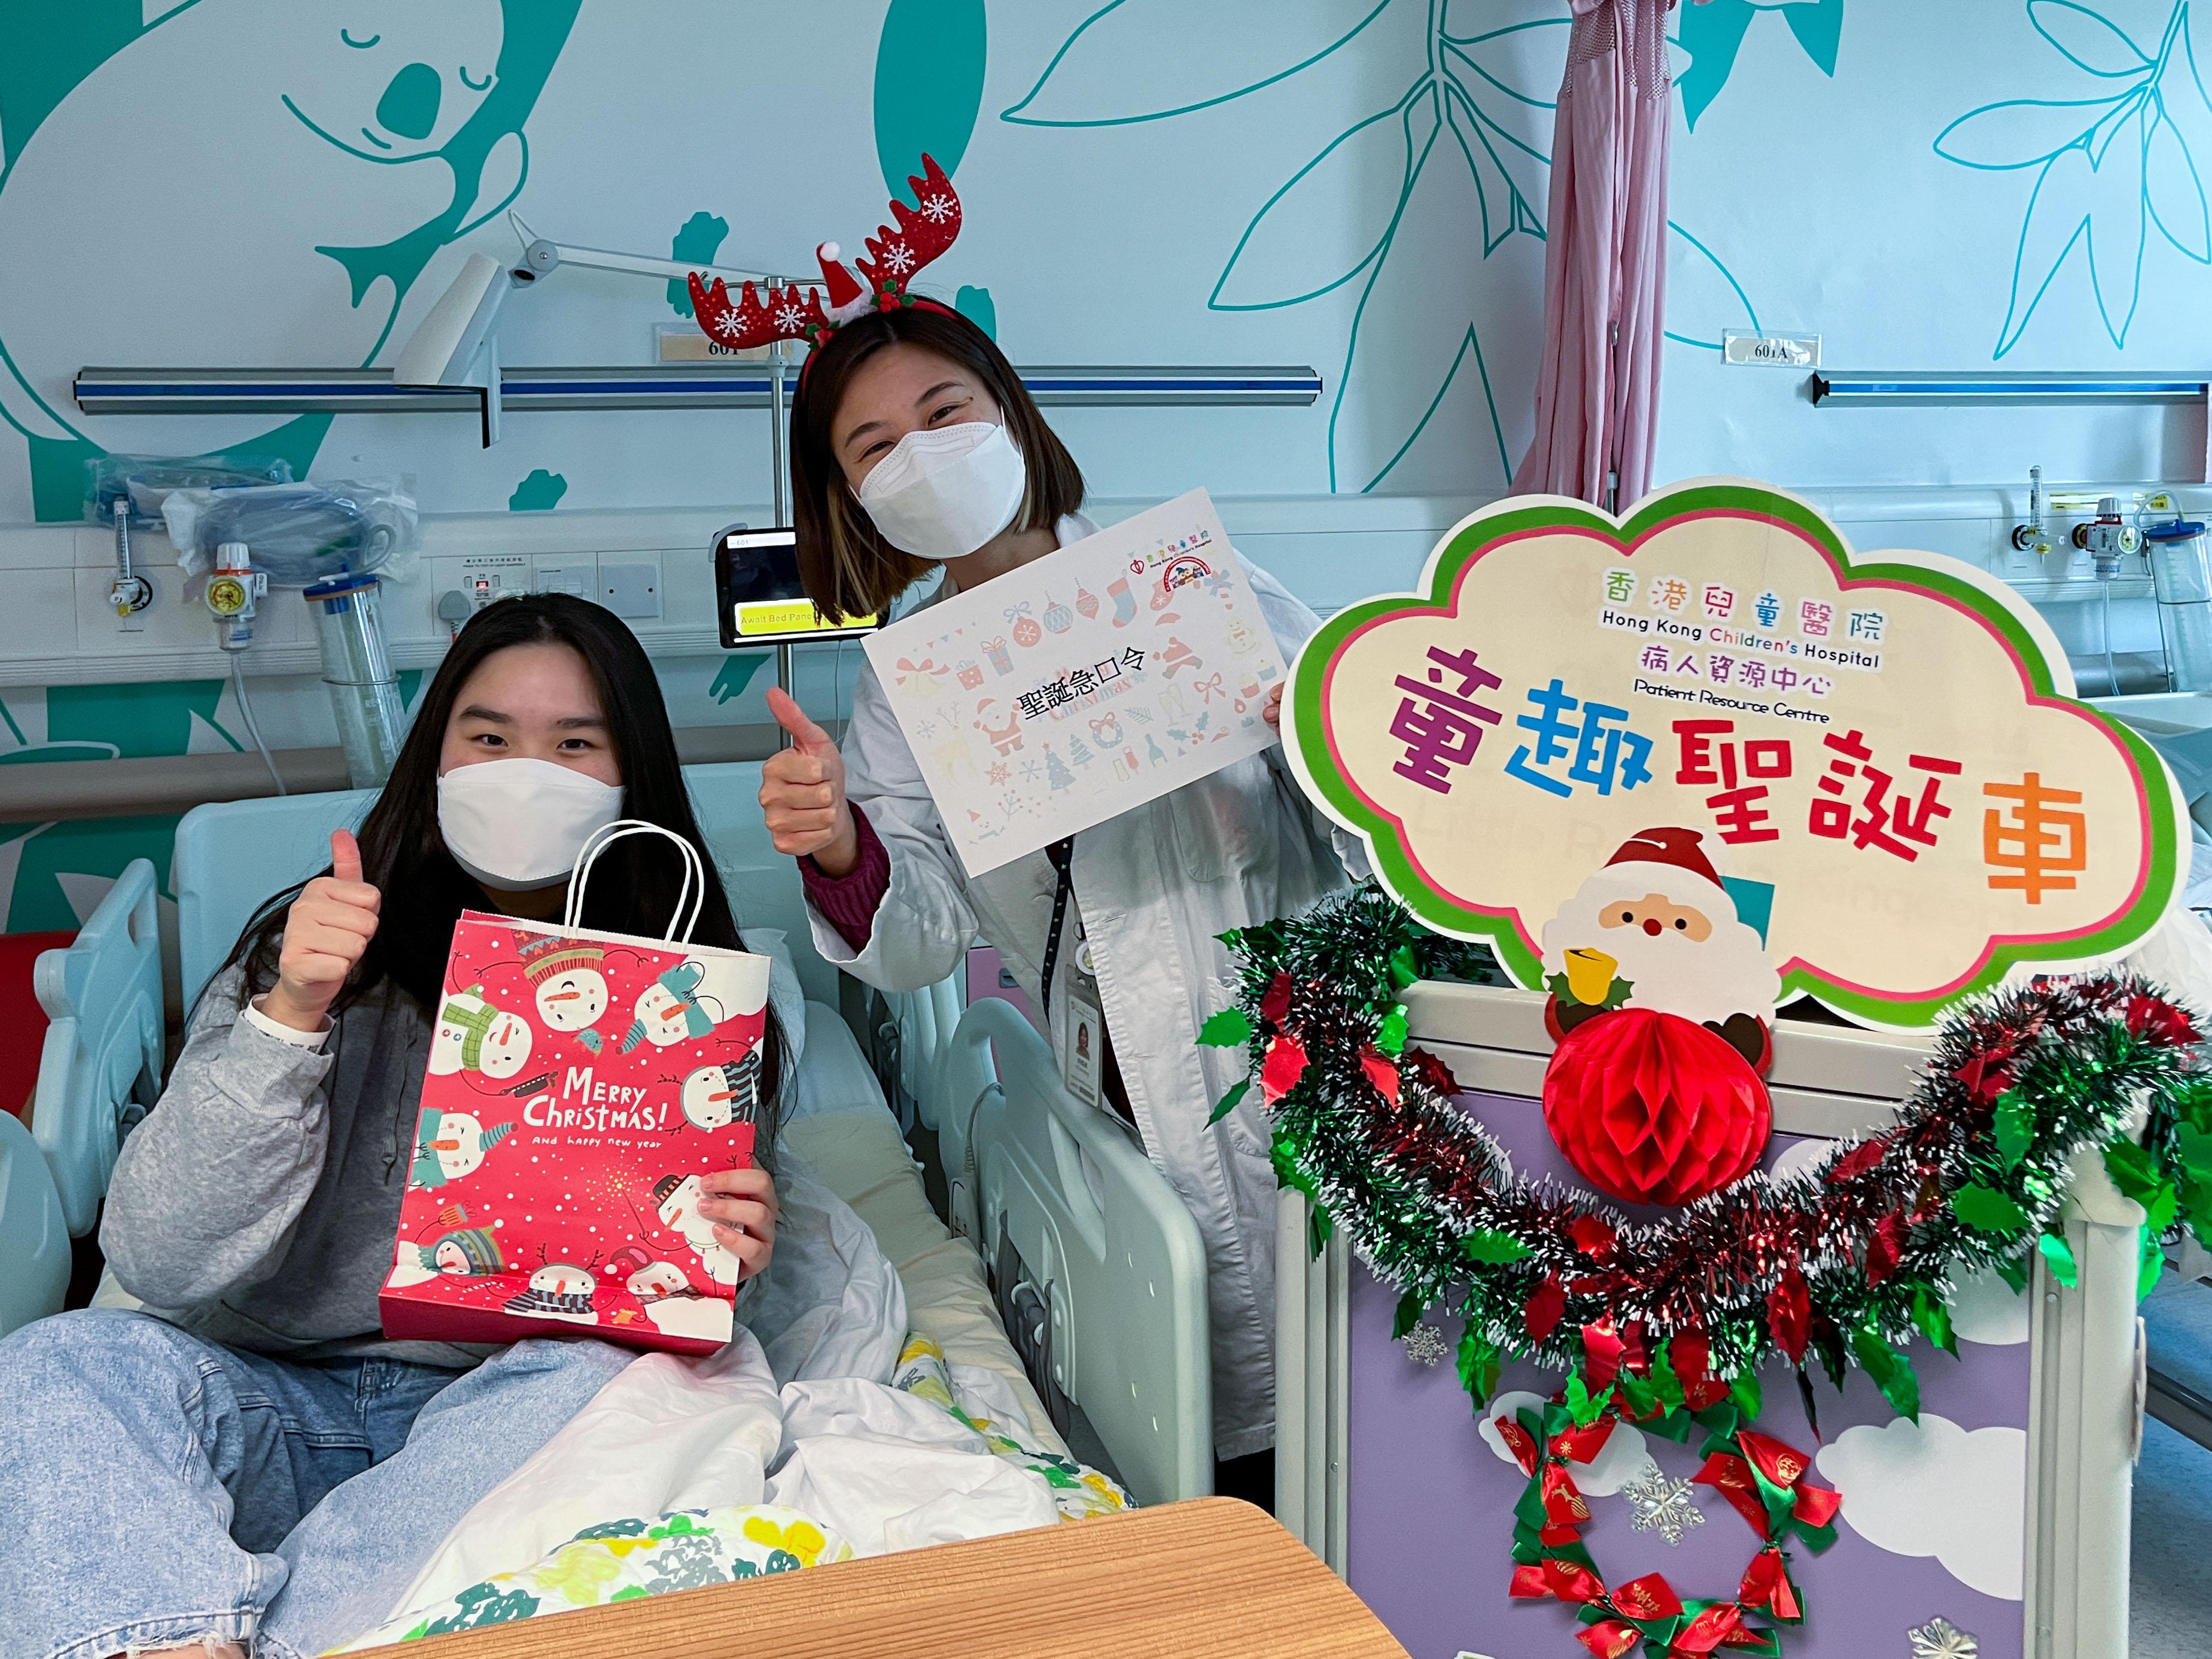 The staff of Hong Kong Children's Hospital visited the wards with a "Christmas cart", surprising the children with fun games and gifts.